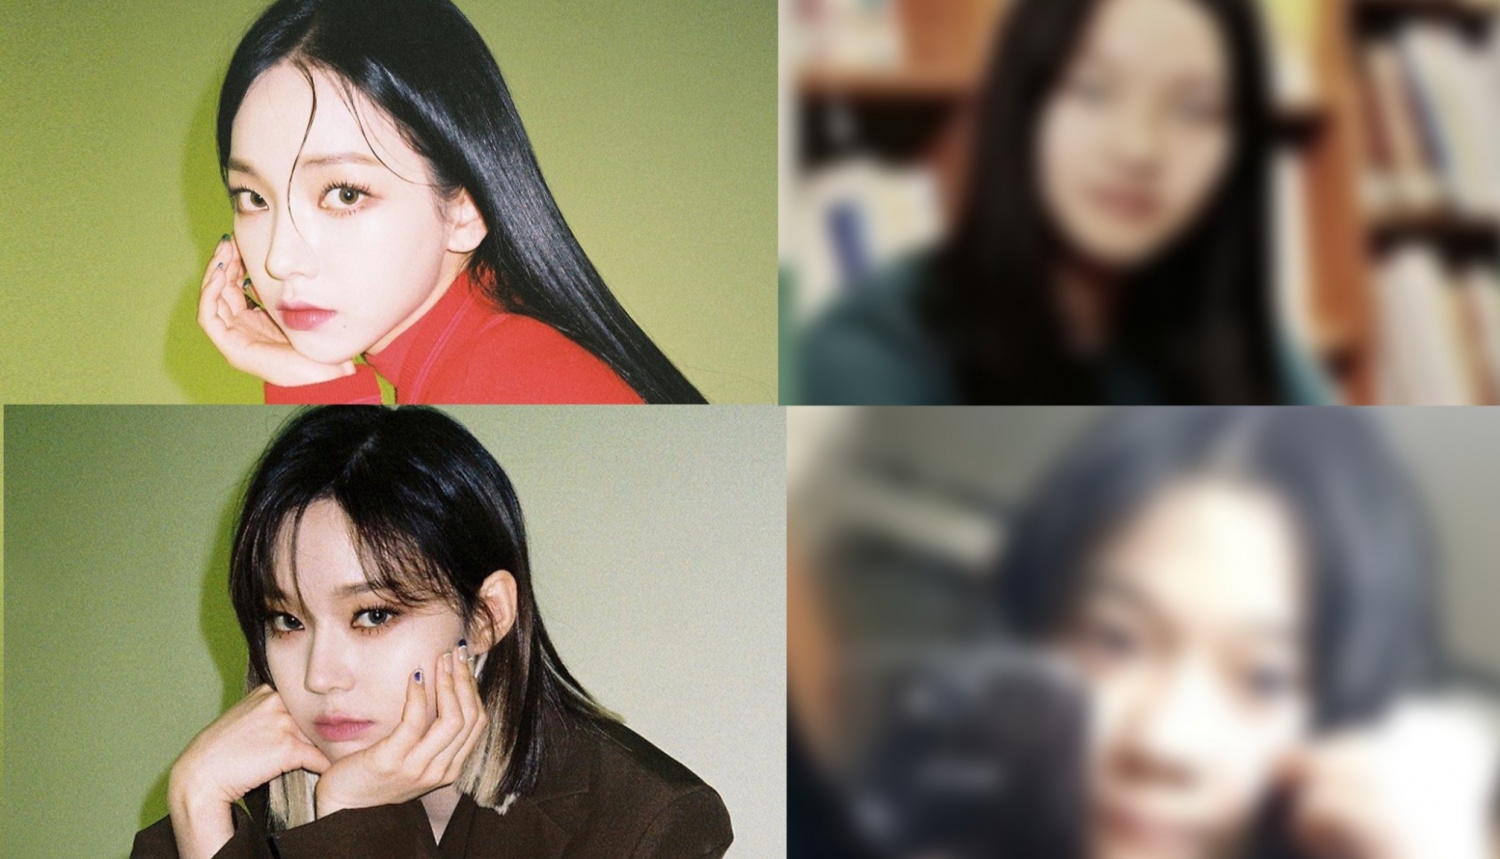 Aespa Winter And Karina Pre Debut Photos Draw Mixed Reactions Plastic Surgery Allegations Arise